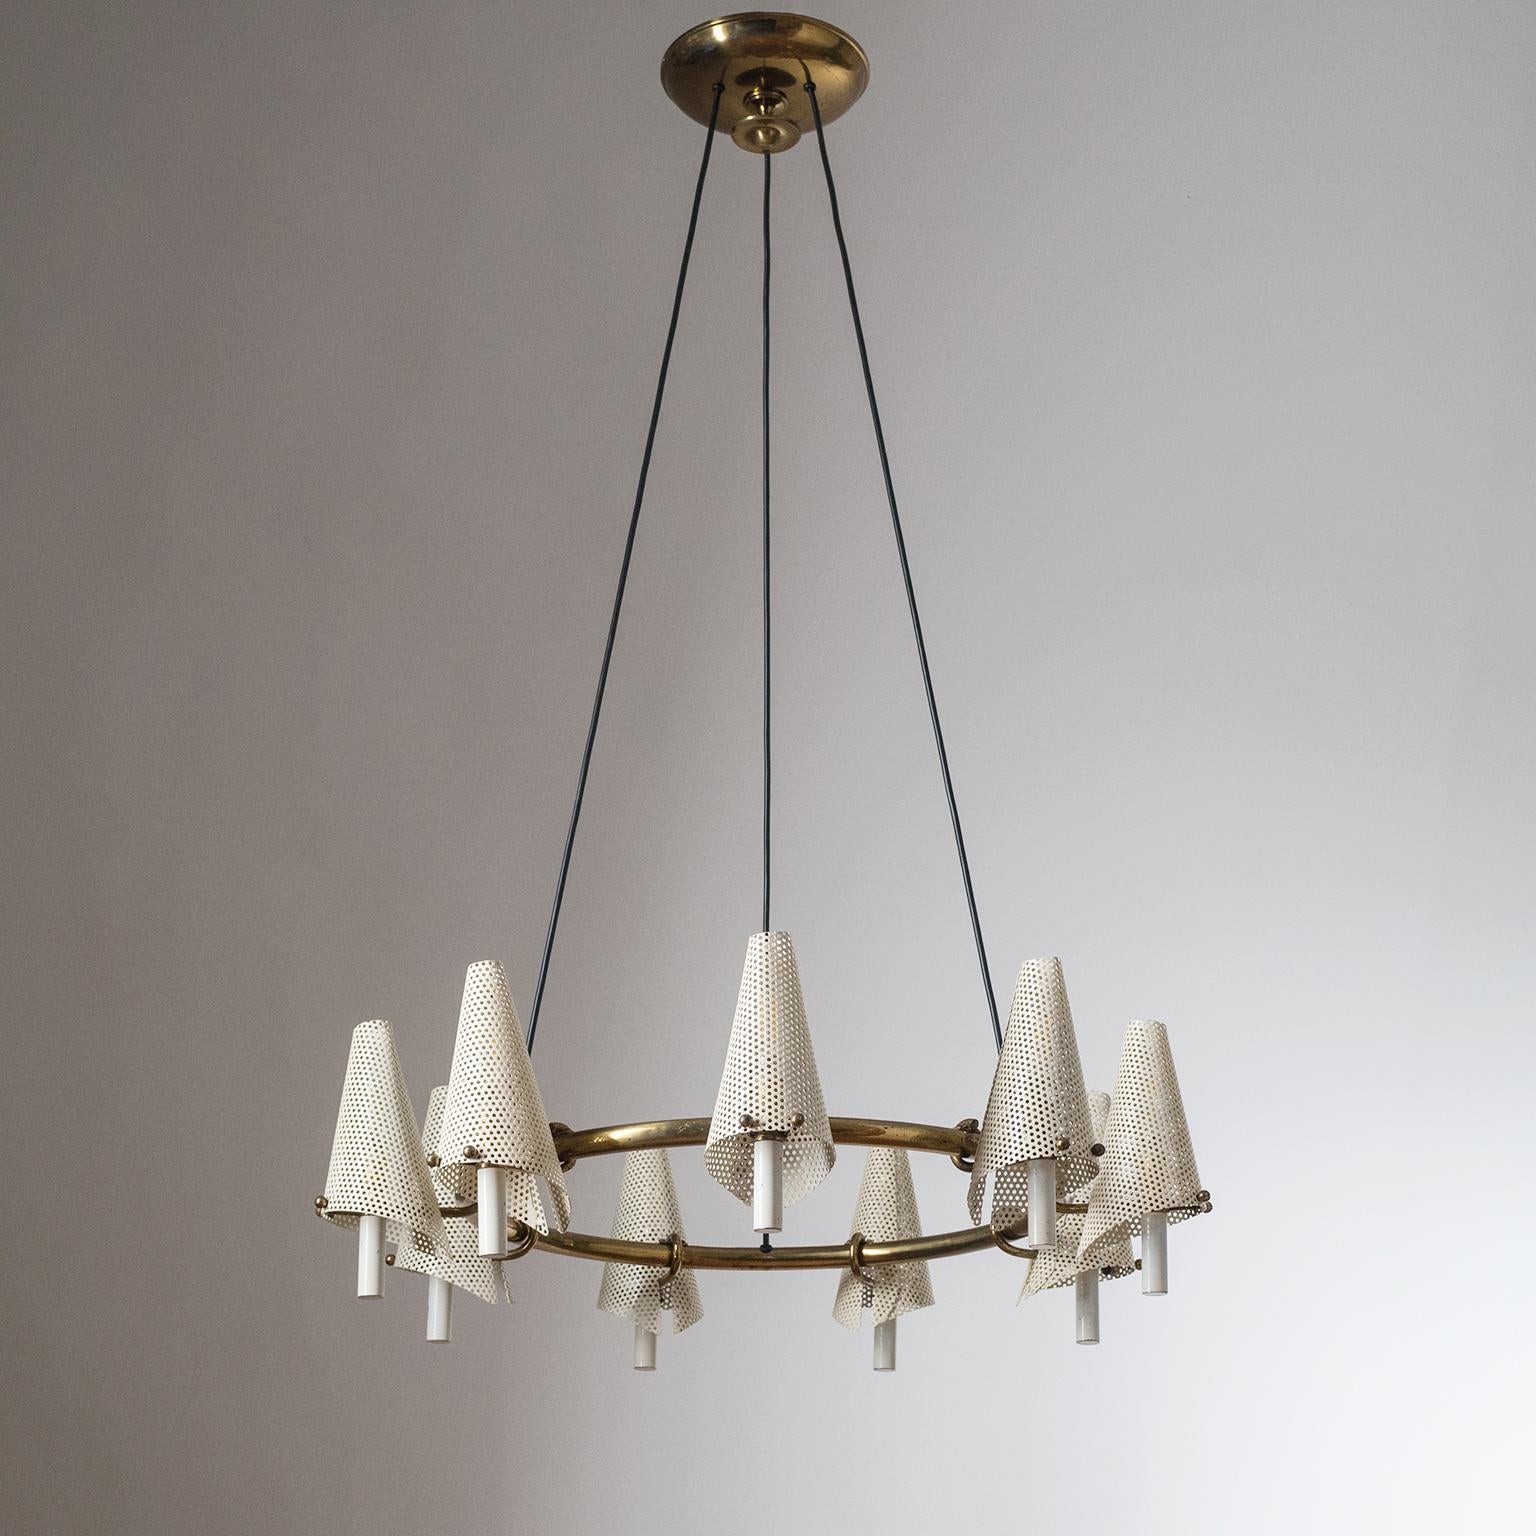 Rare Italian suspension chandelier from the late 1940s. Large brass ring with nine sculptural sconce-like arms with perforated steel shades. This is most likely a custom piece and therefore unique. Nine brass and ceramic E14 sockets with new wiring.